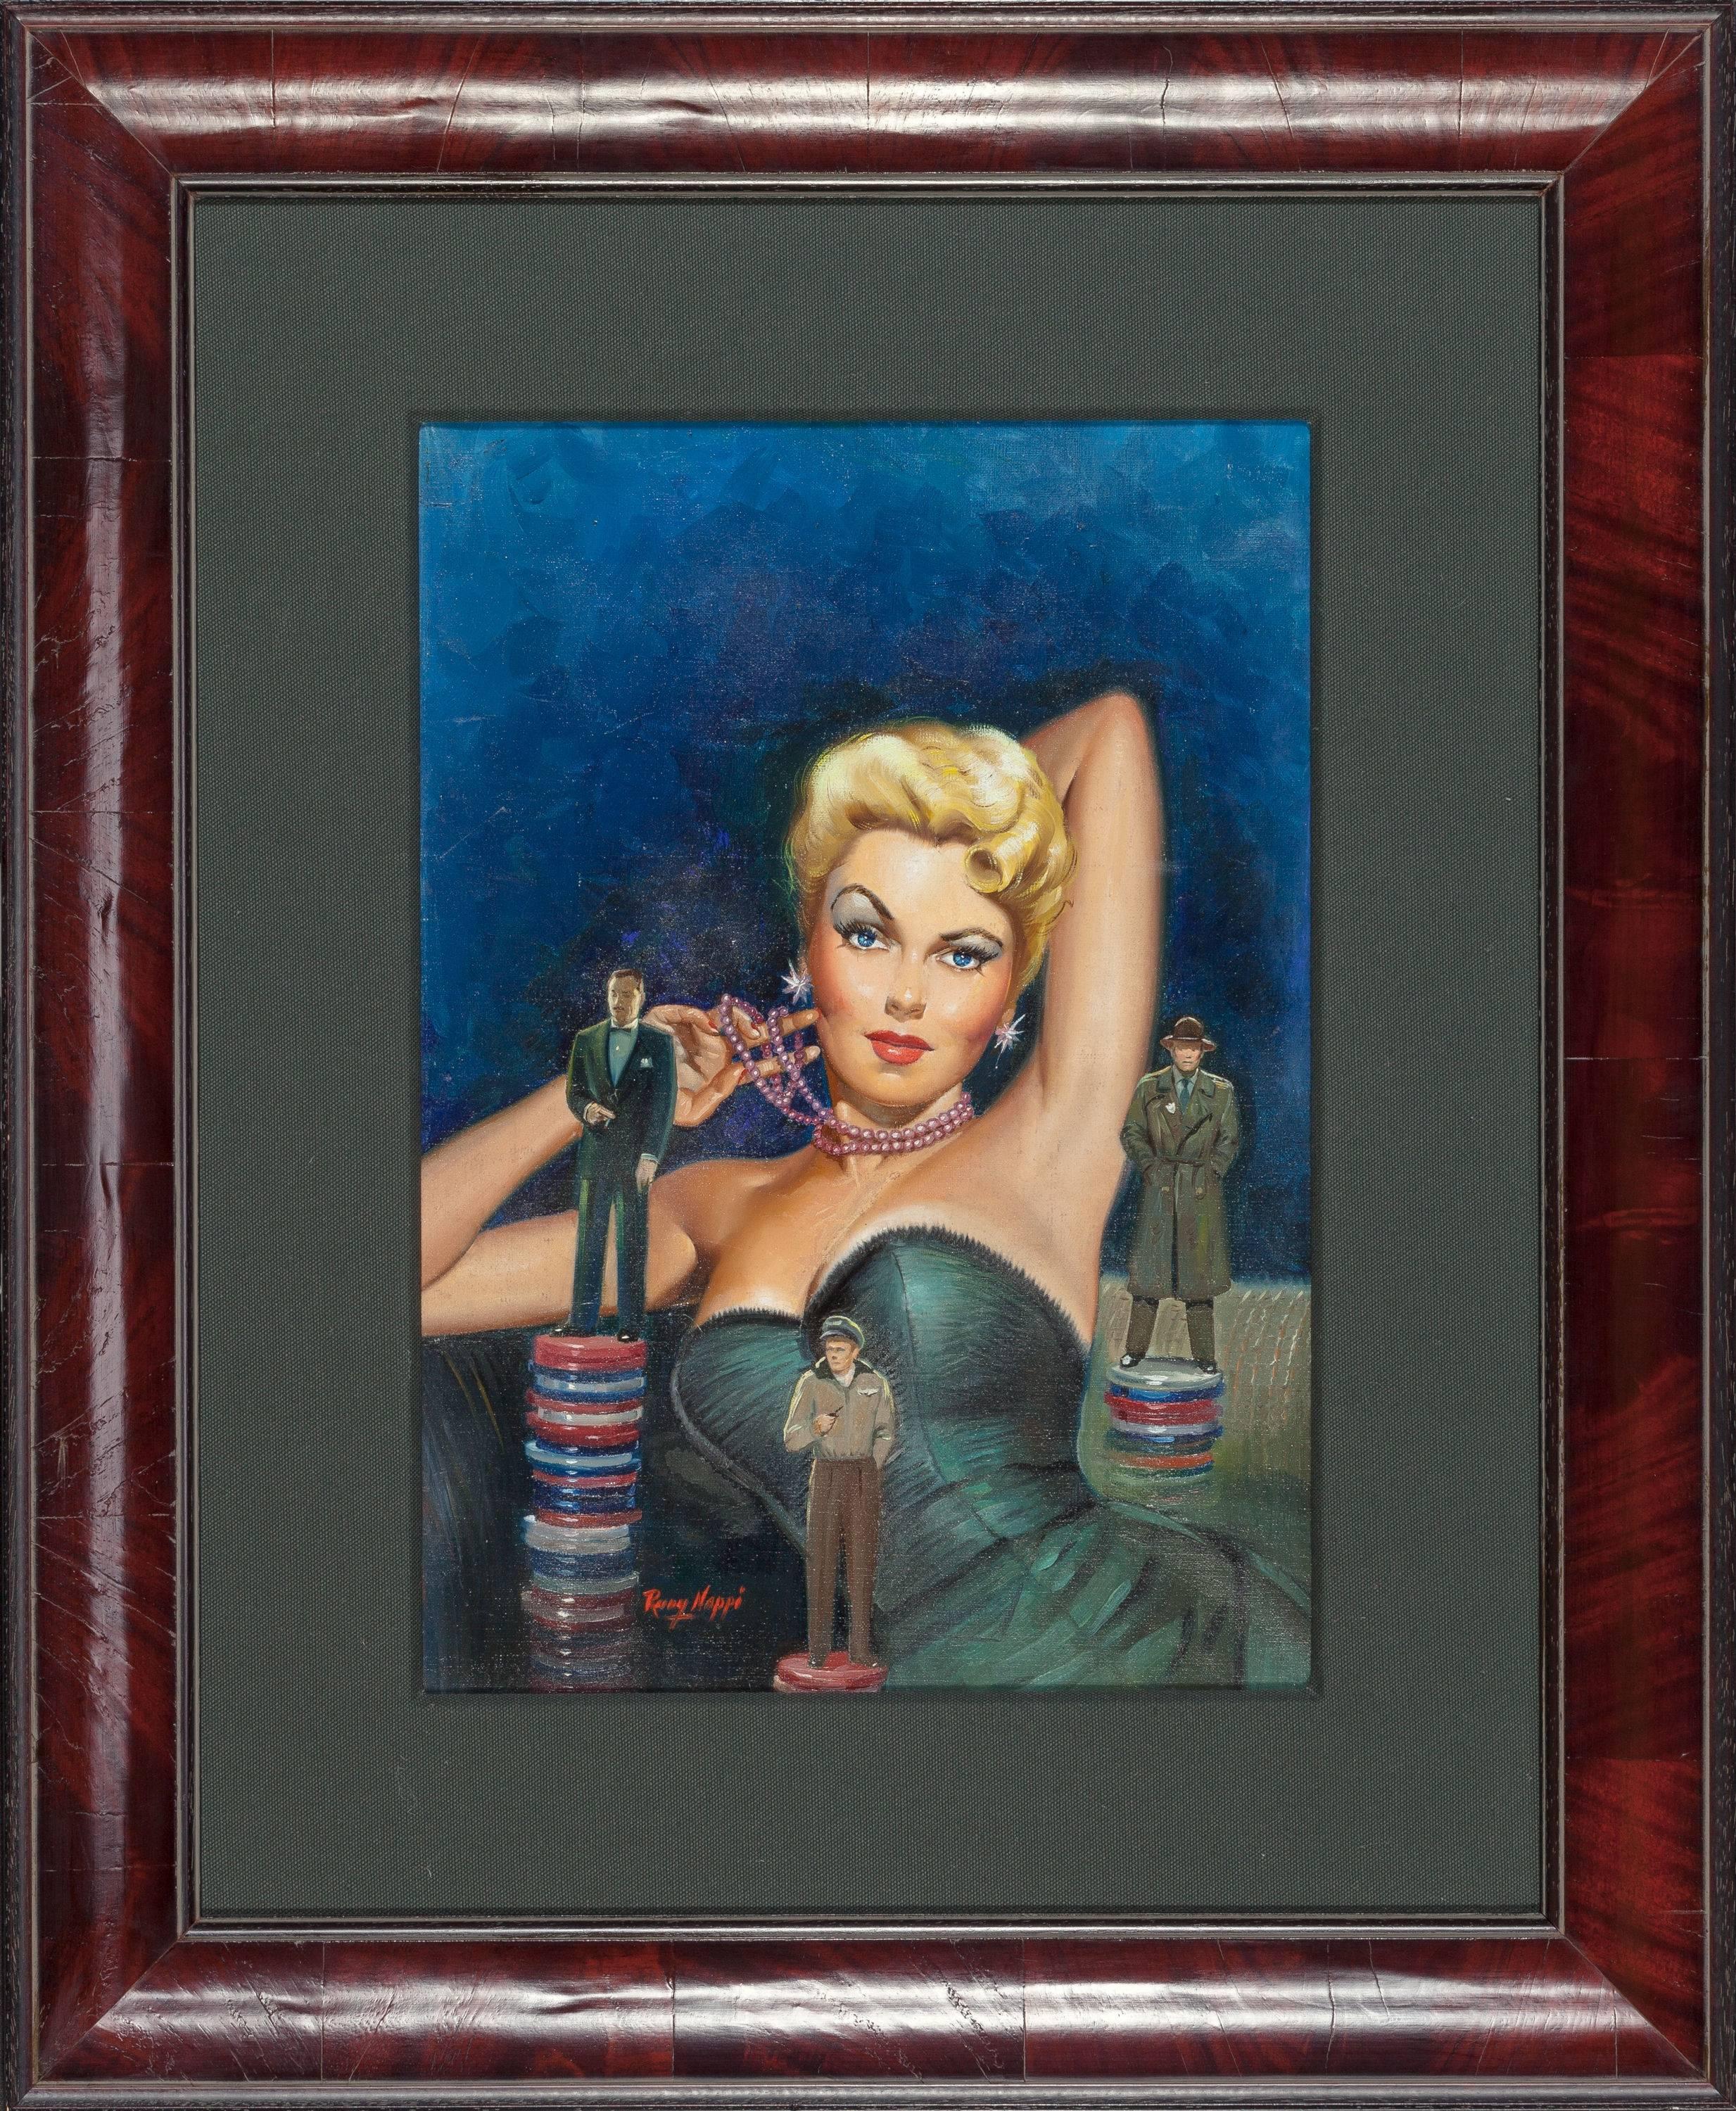 Gambler's Girl - Painting by Rudy Nappi